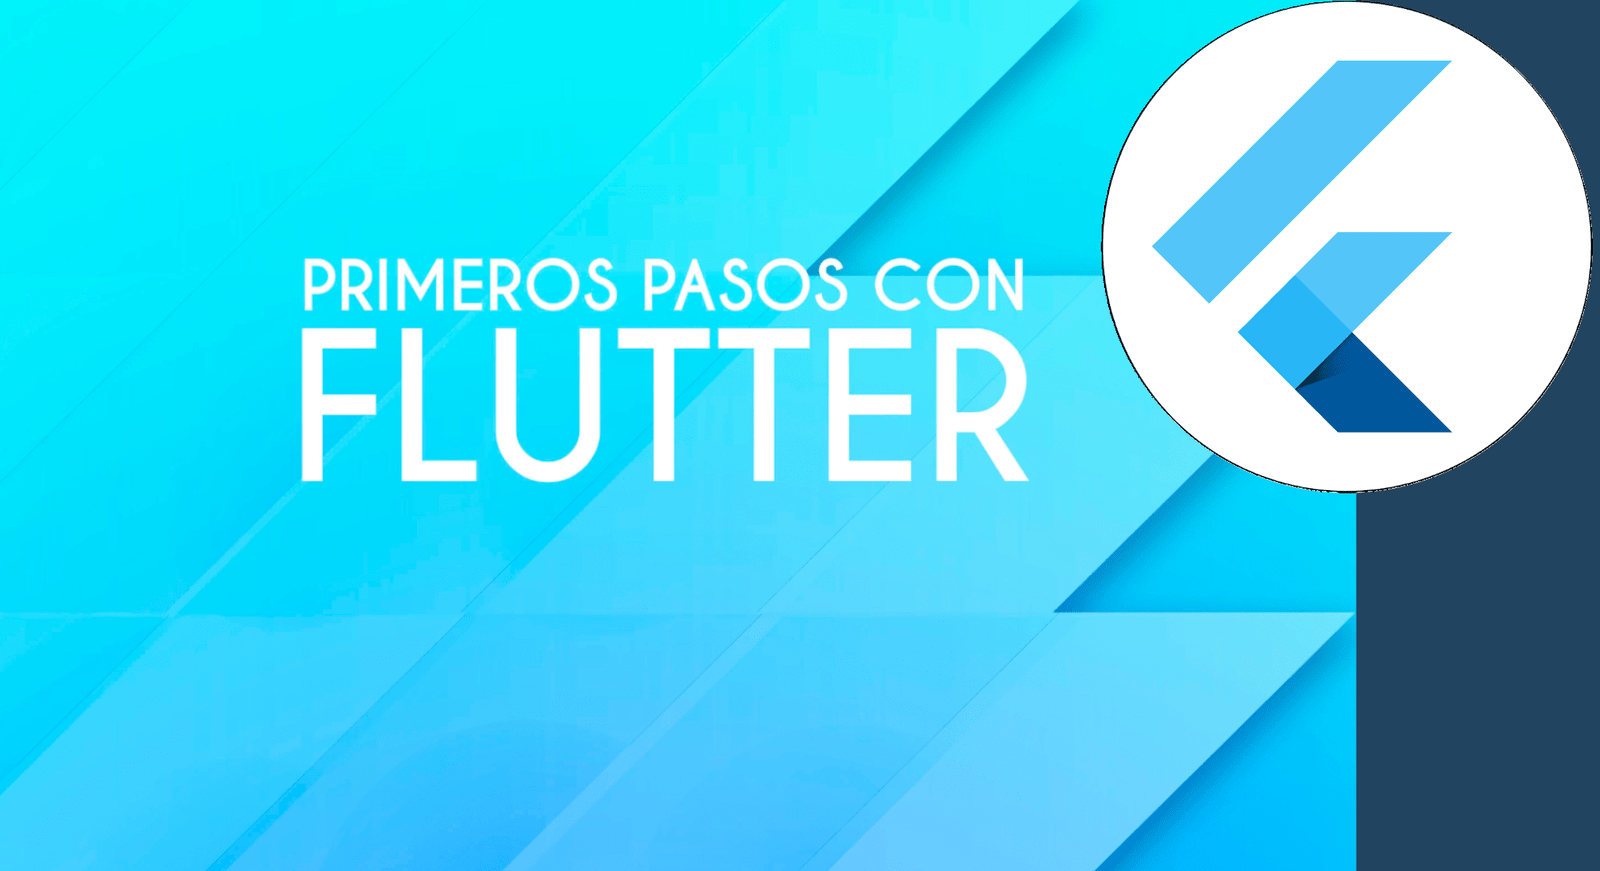 Getting started with Flutter 3